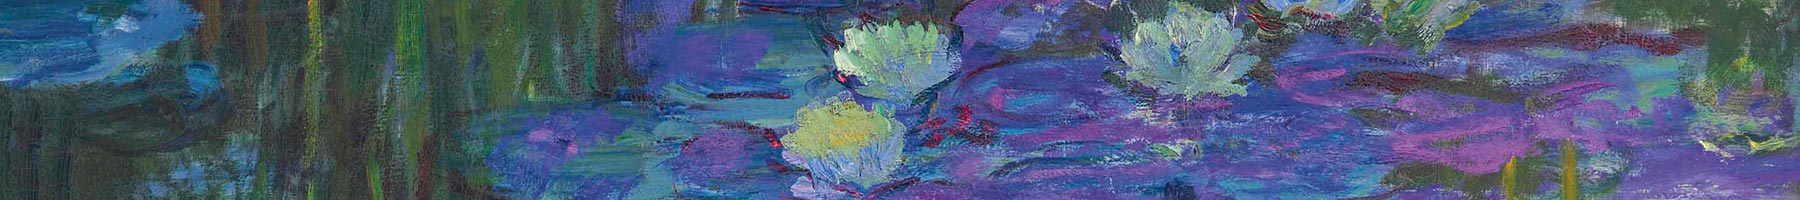 oil painting of water lilies